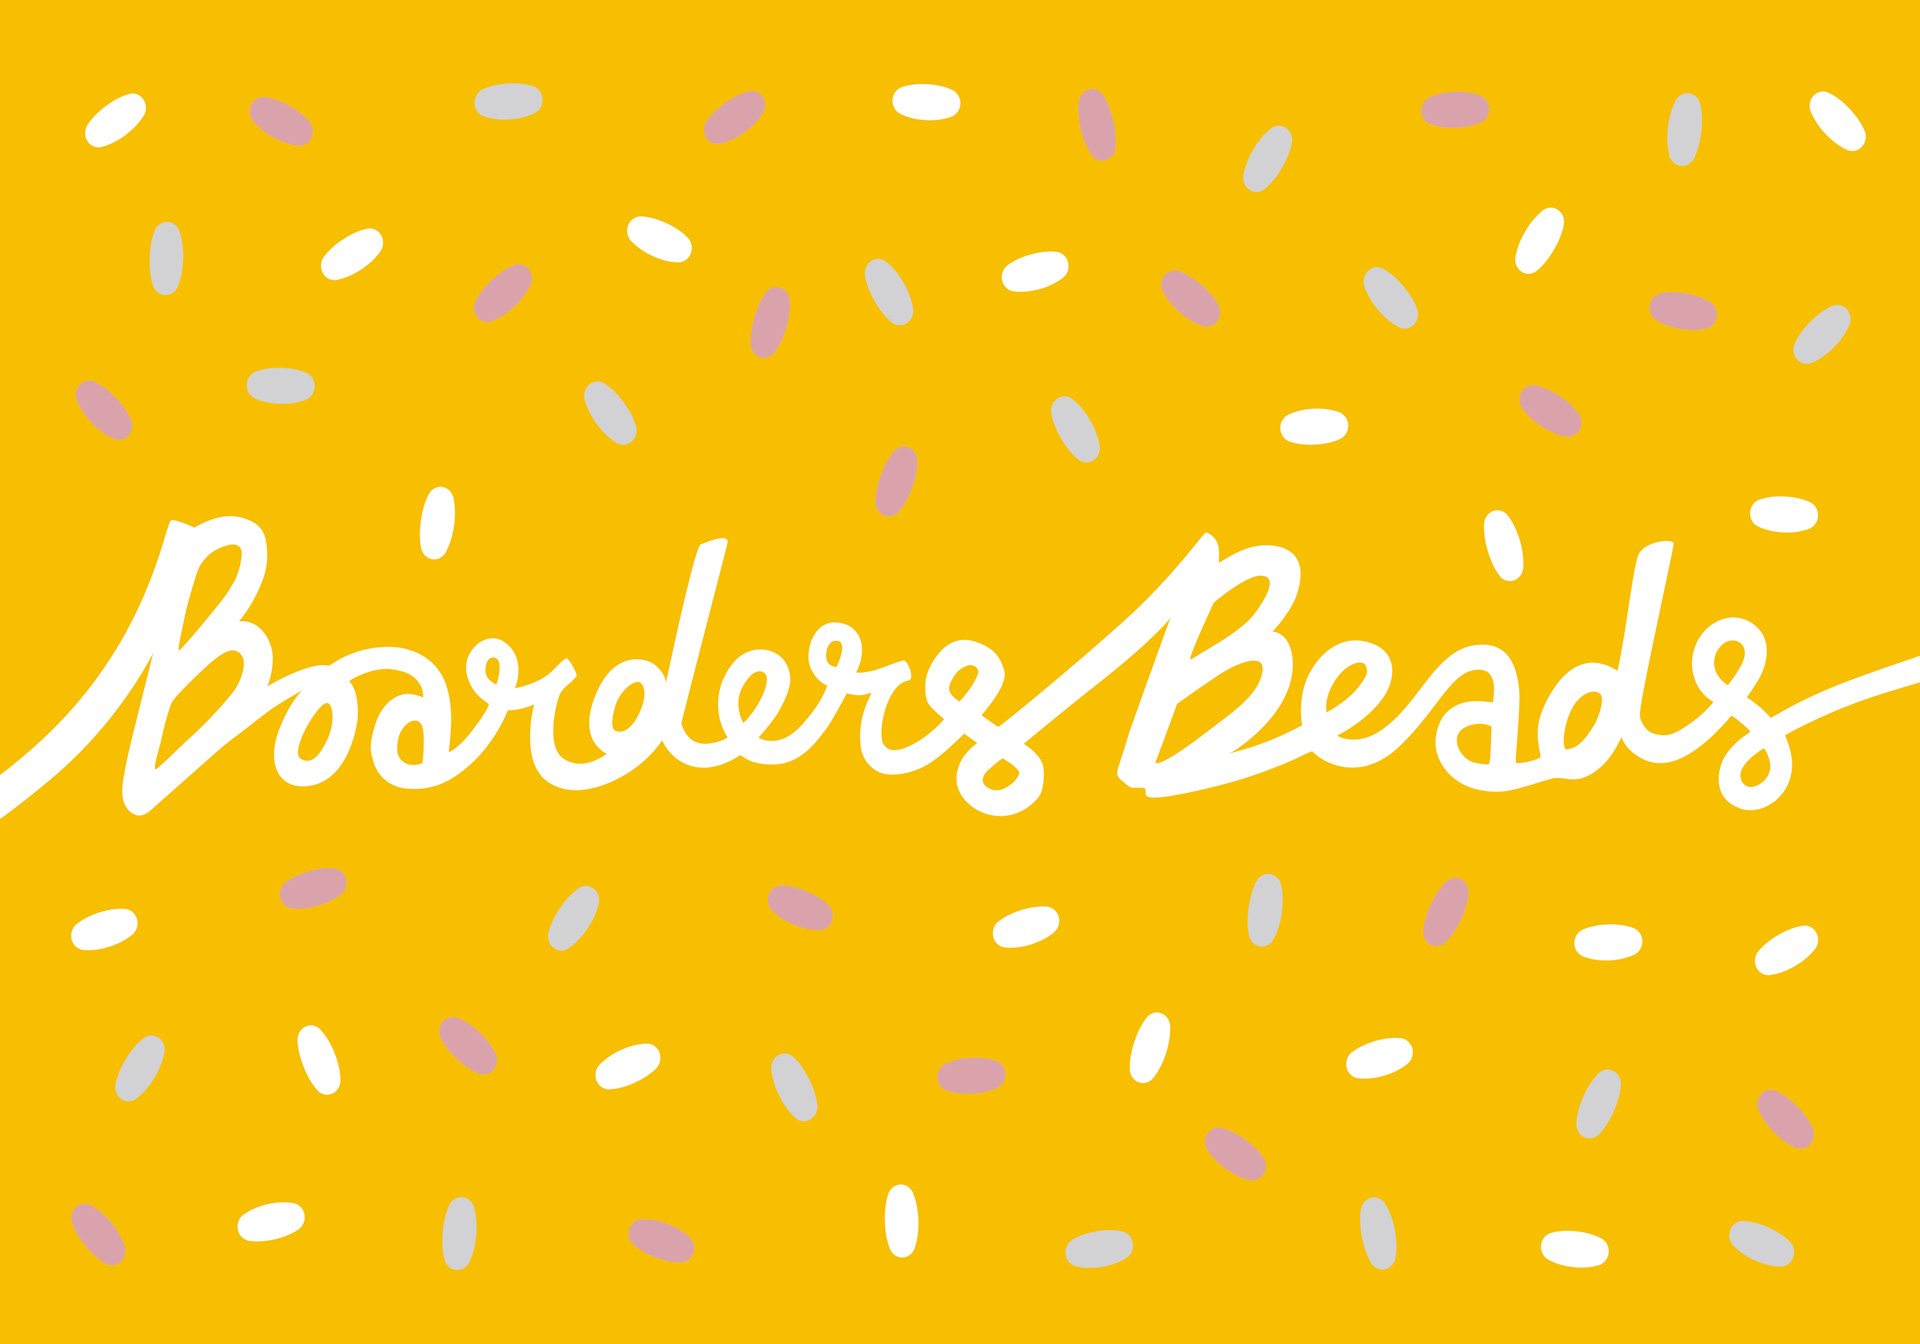 Logo design and brand identity for Boarders Beads